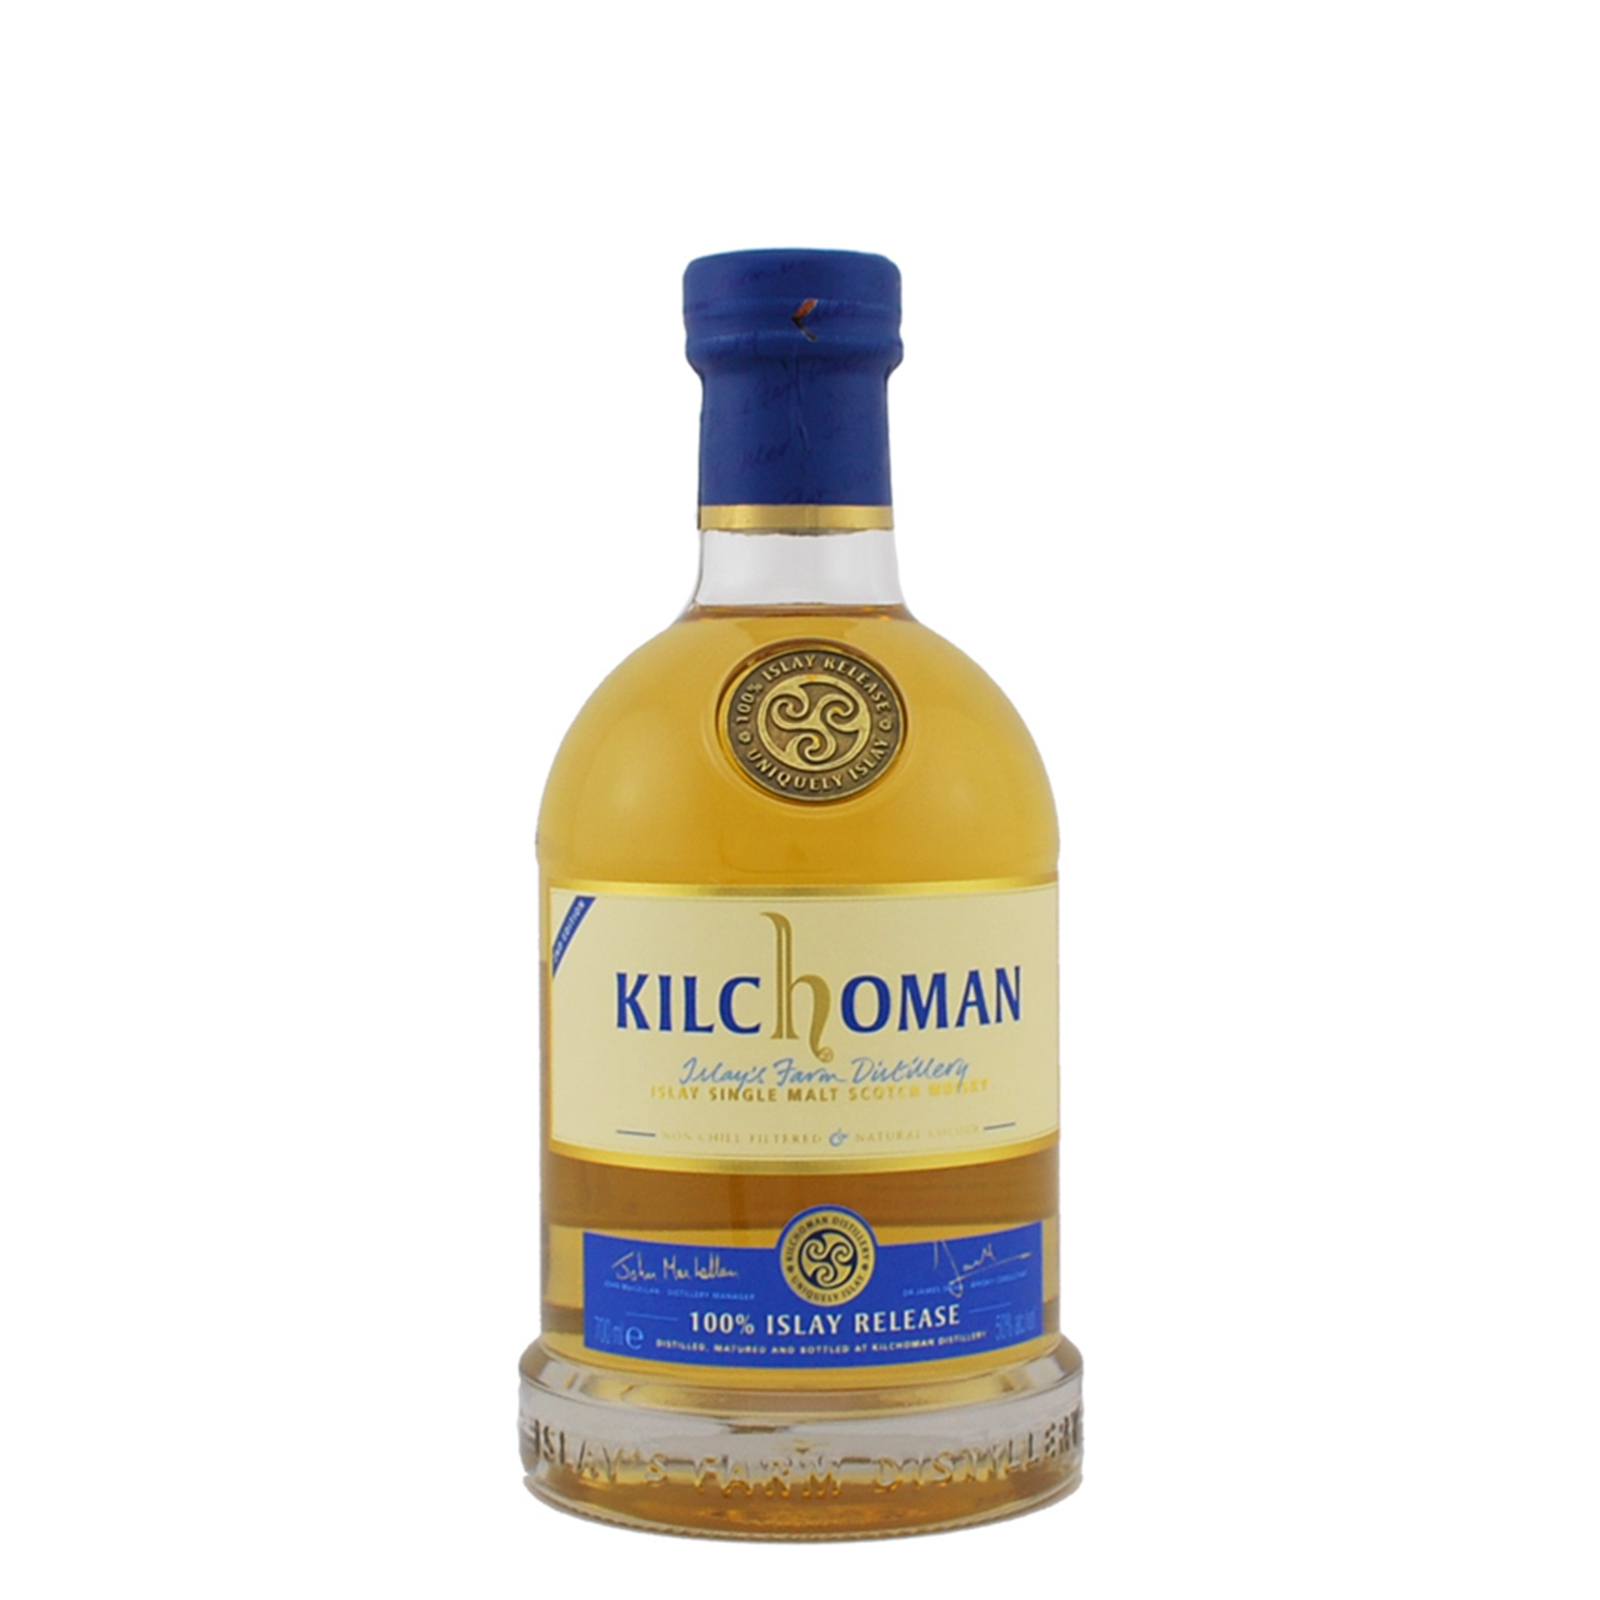 You are currently viewing Kilchoman 100% Islay – 2nd Edition